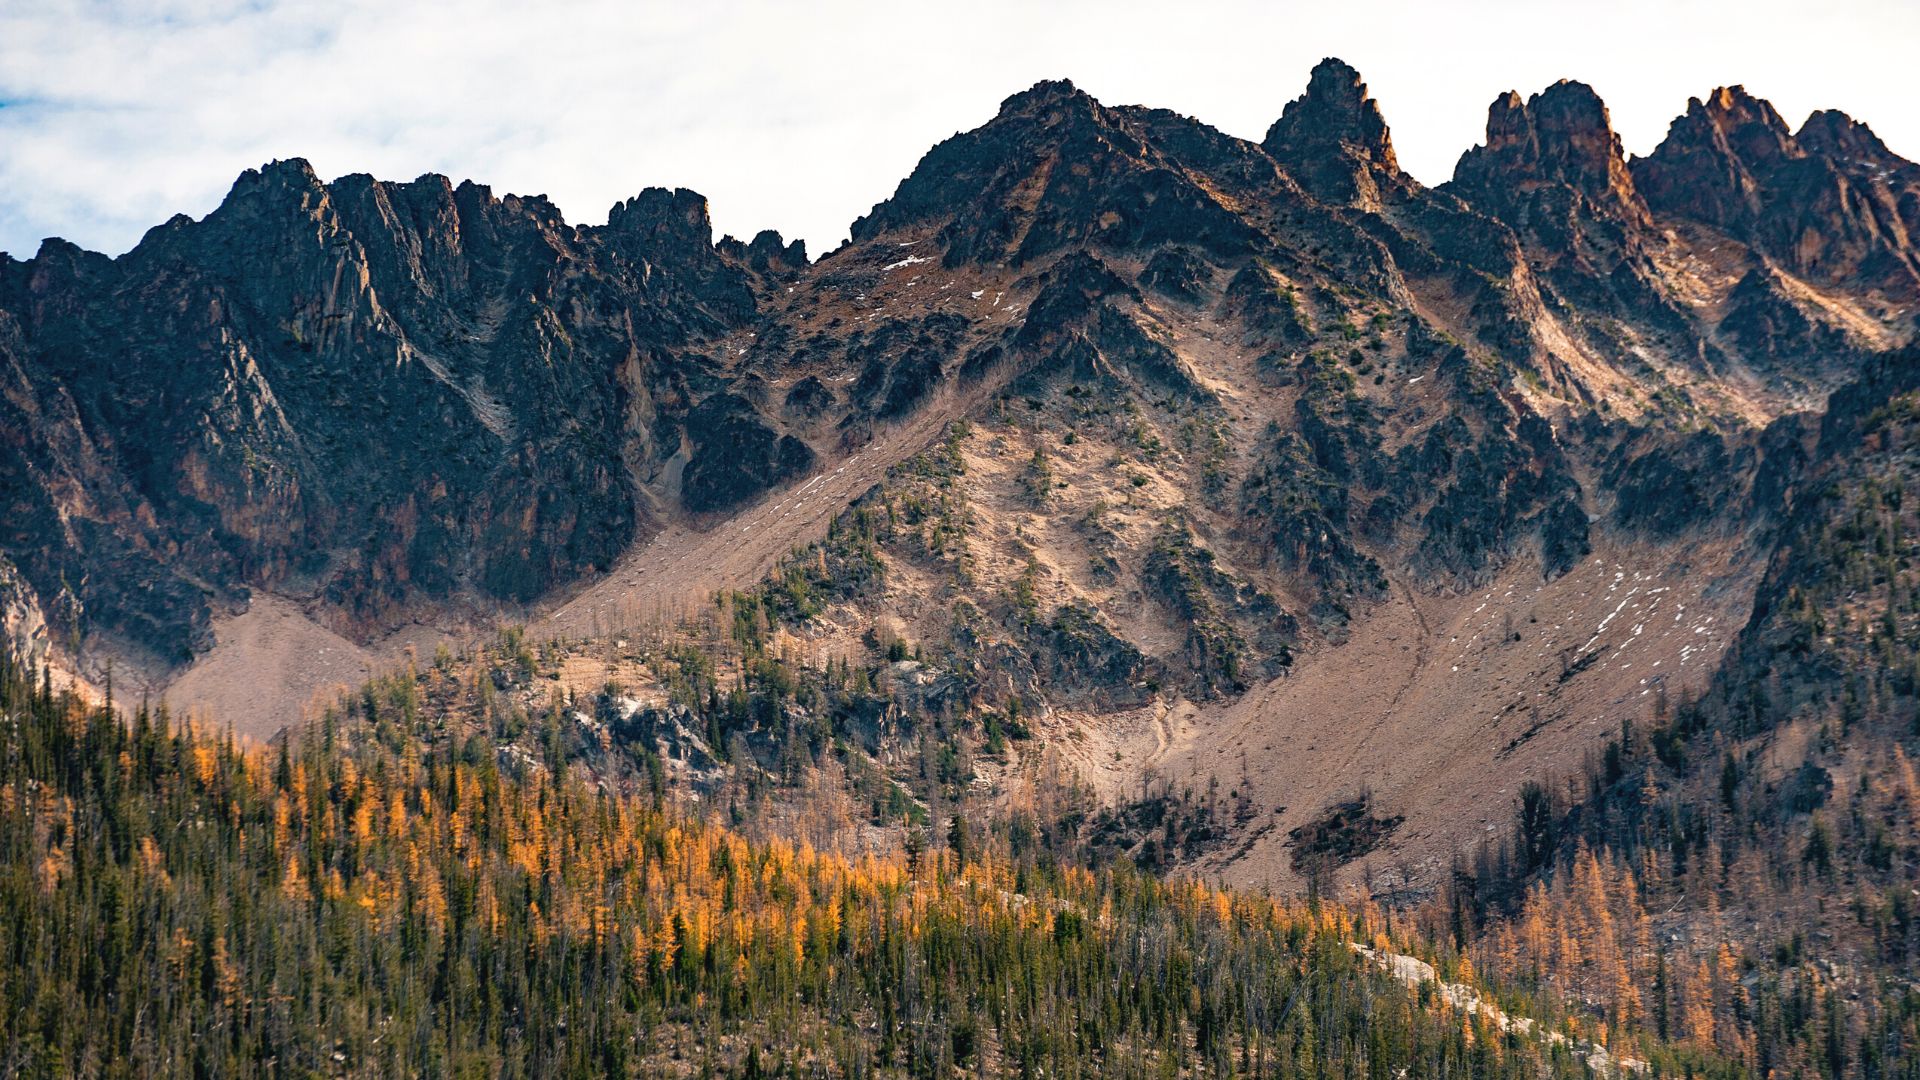 Rocky mountain slopes rise high above an autumnal colored forest 